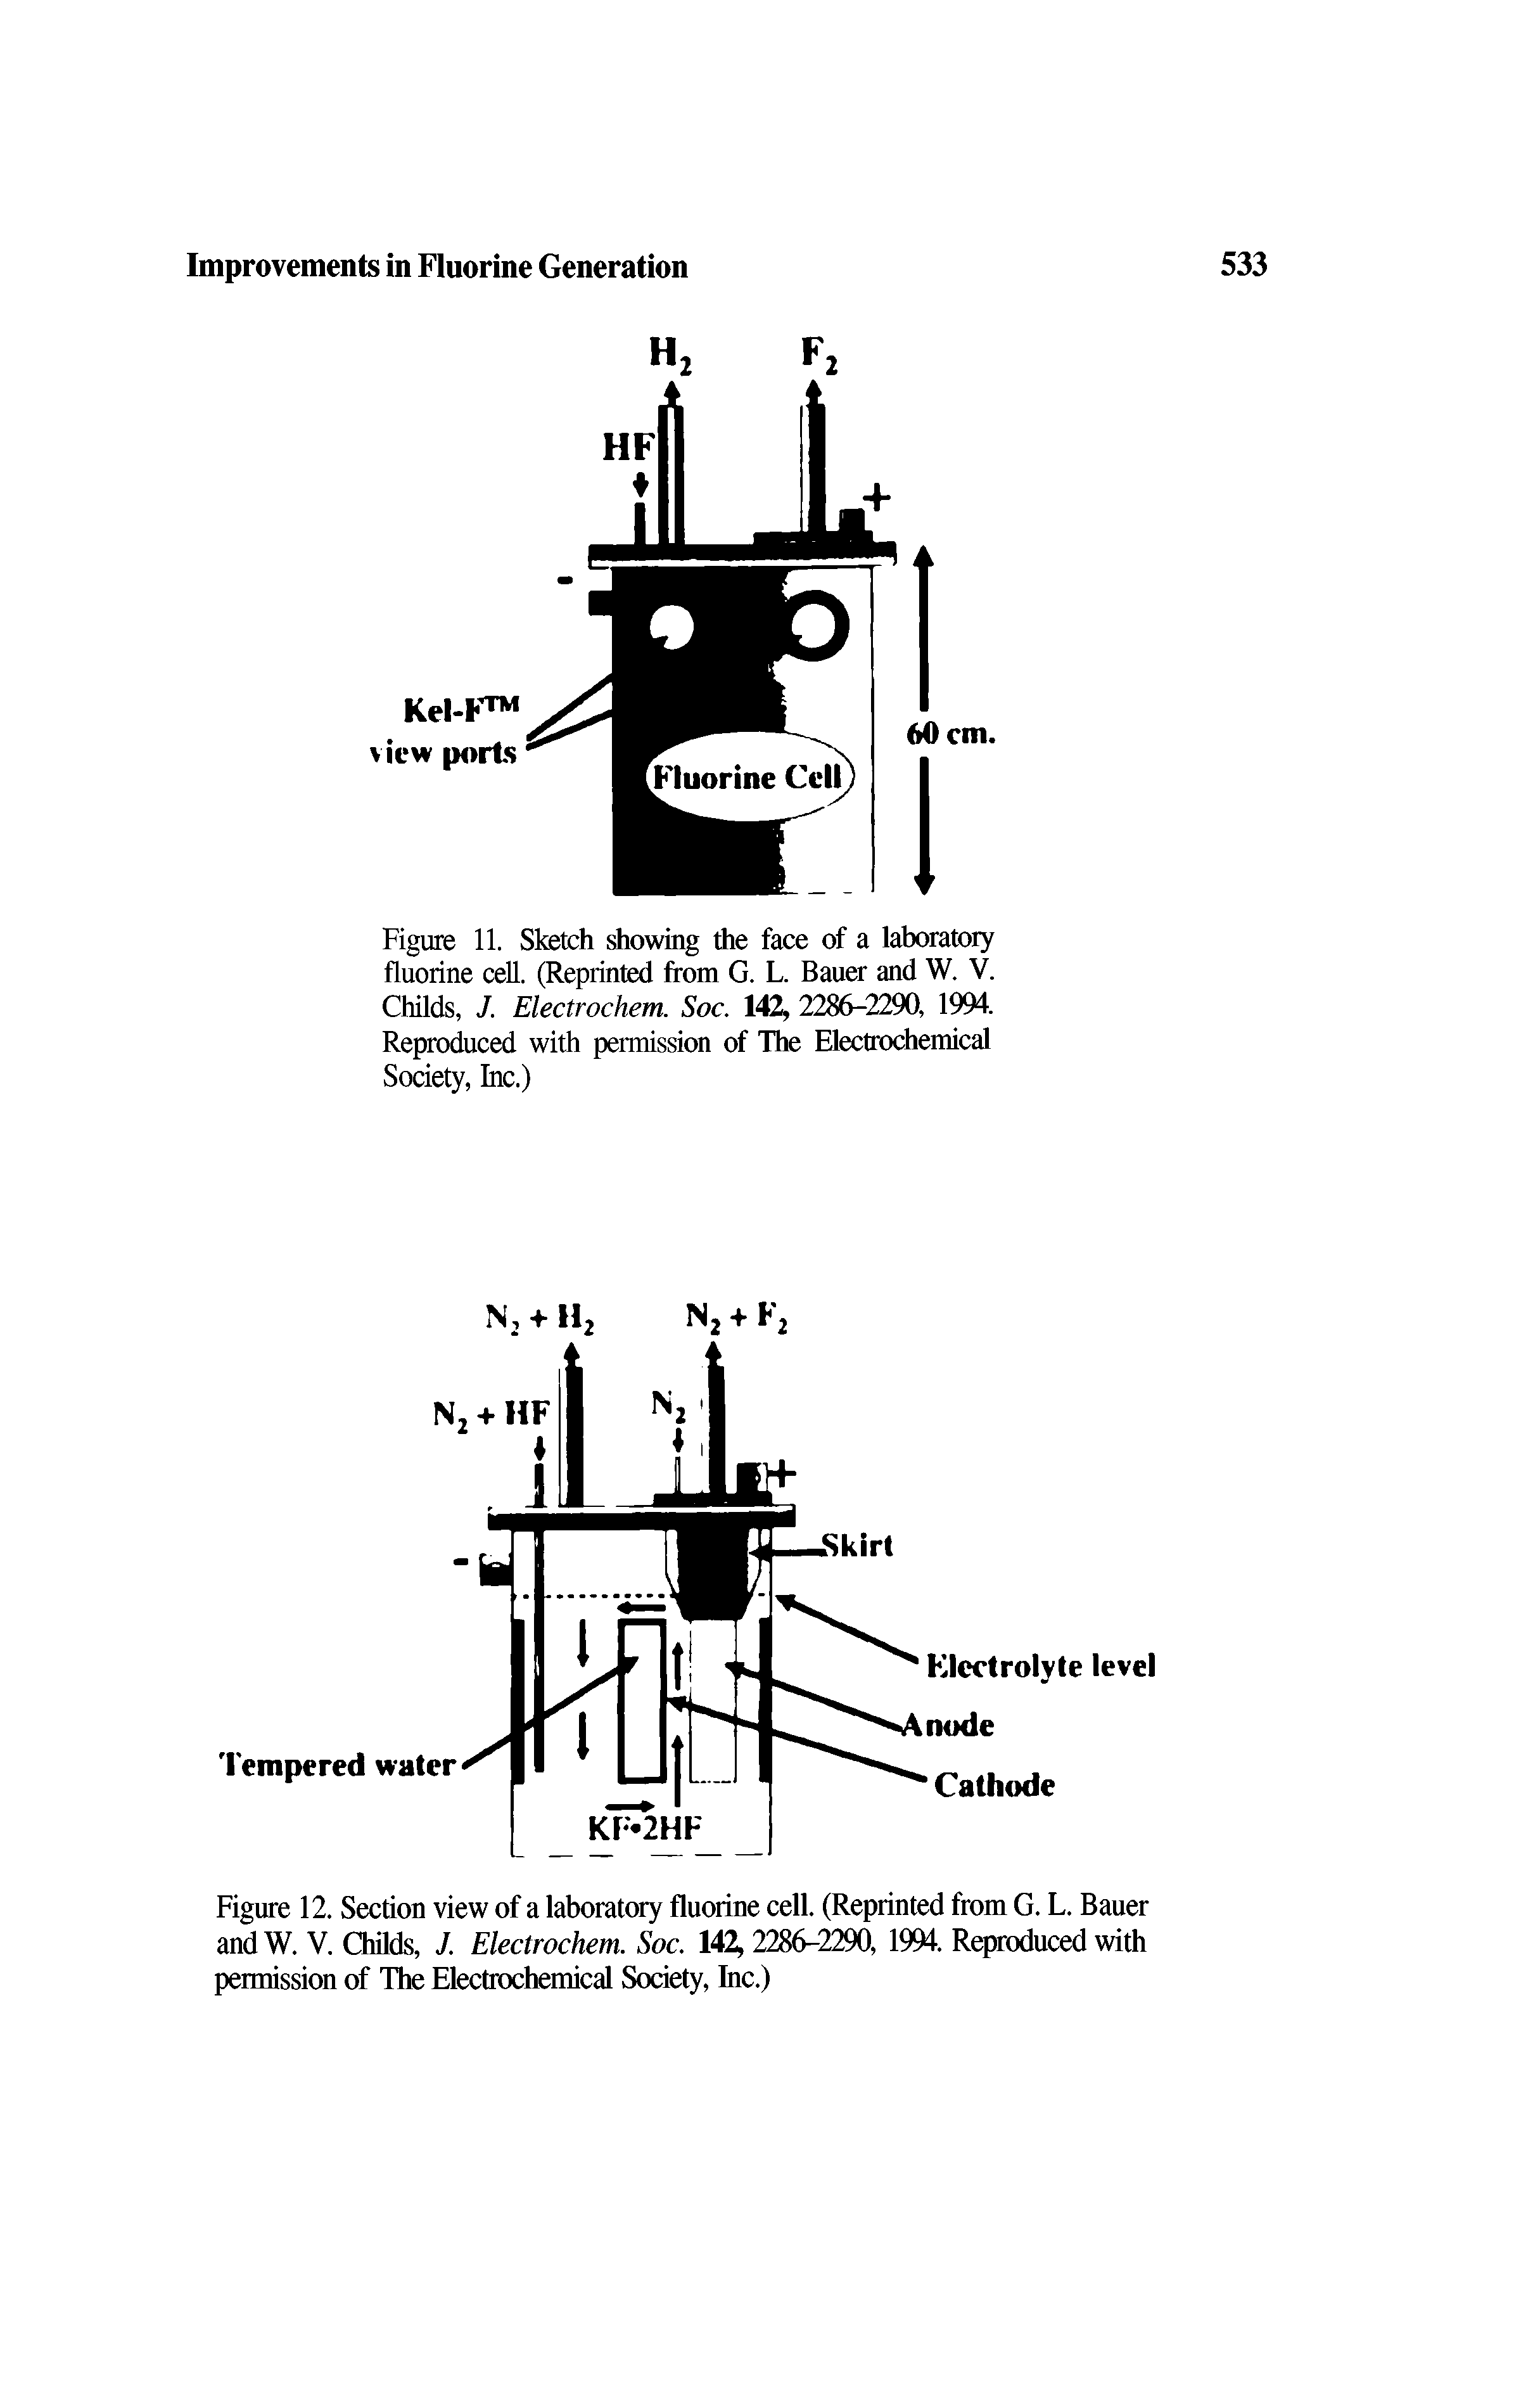 Figure 11. Sketch showing the face of a laboratory fluorine cell. (Reprinted from G. L. Bauer and W. V. Childs, J. Electrochem. Soc. 142, 2286-2290, 1994. Reproduced with permission of The Electrochemical Society, Inc.)...